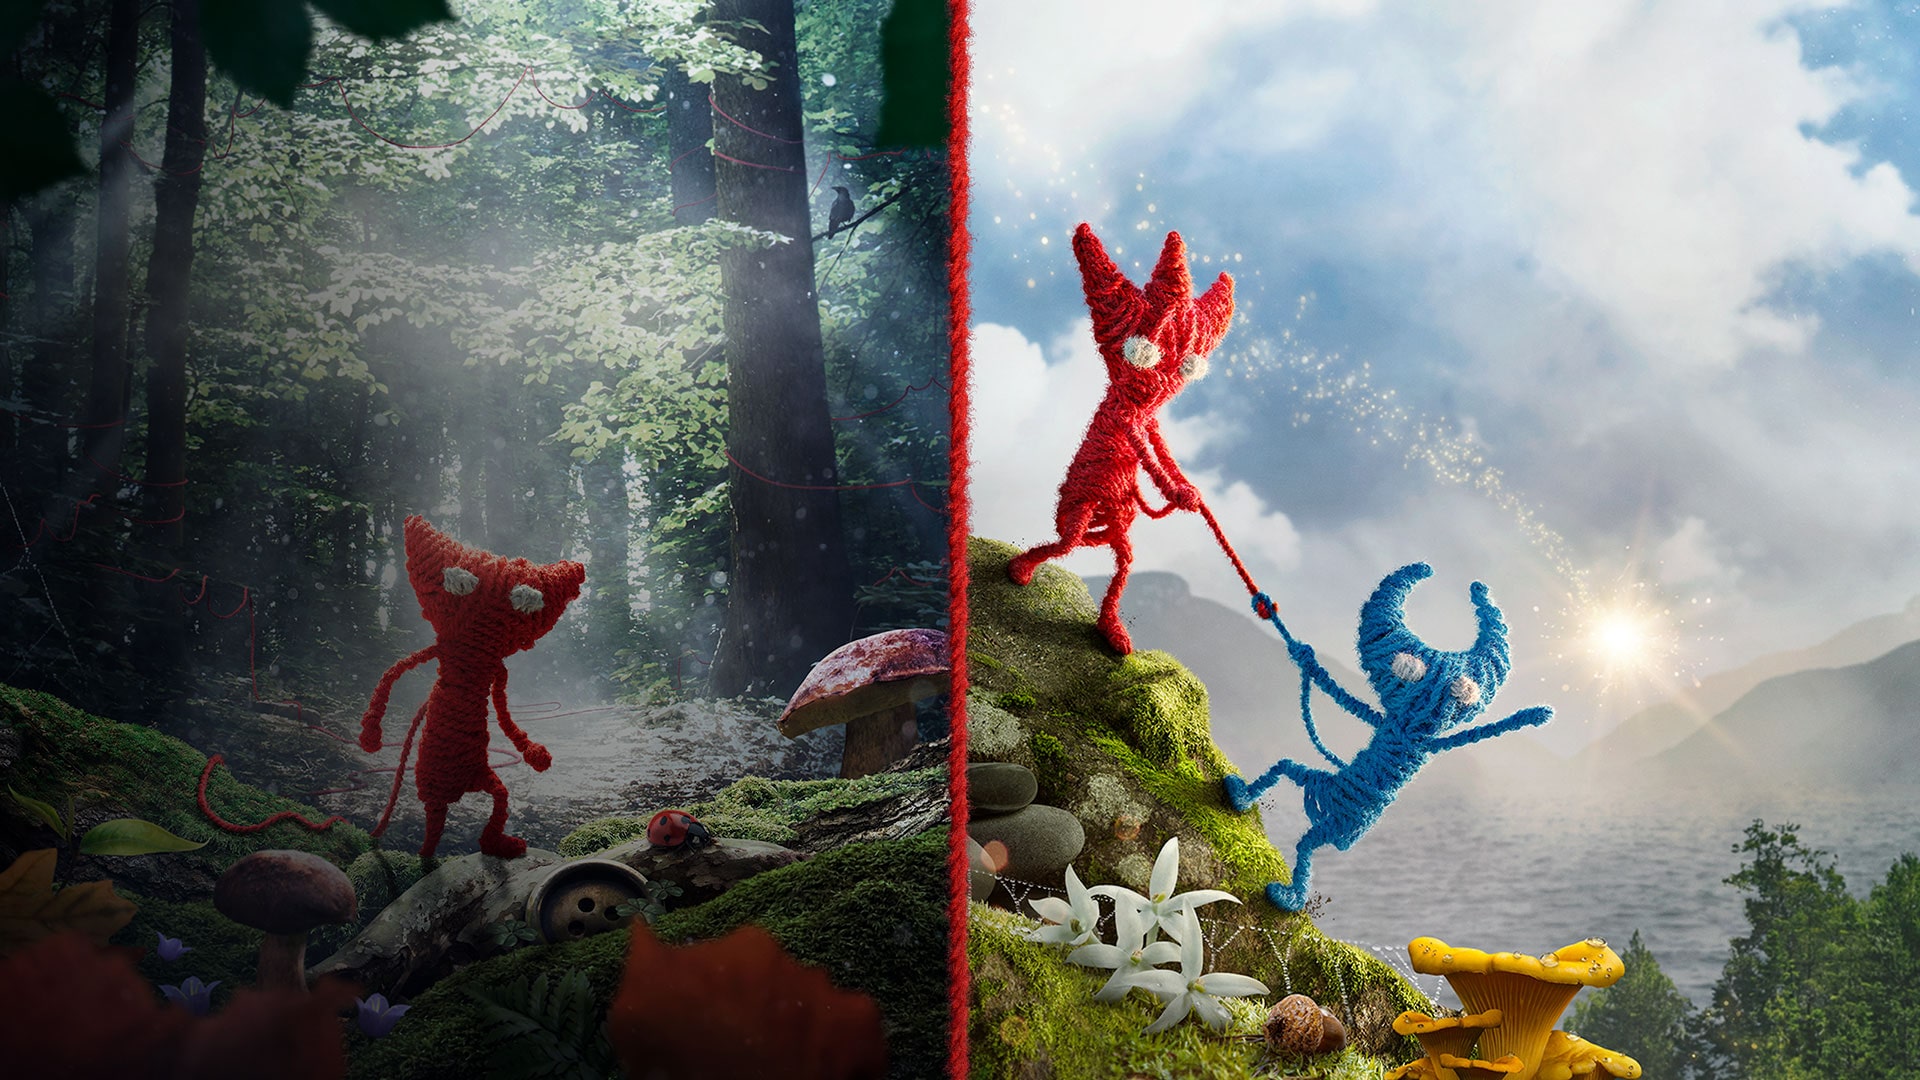 Unravel 2 is out now